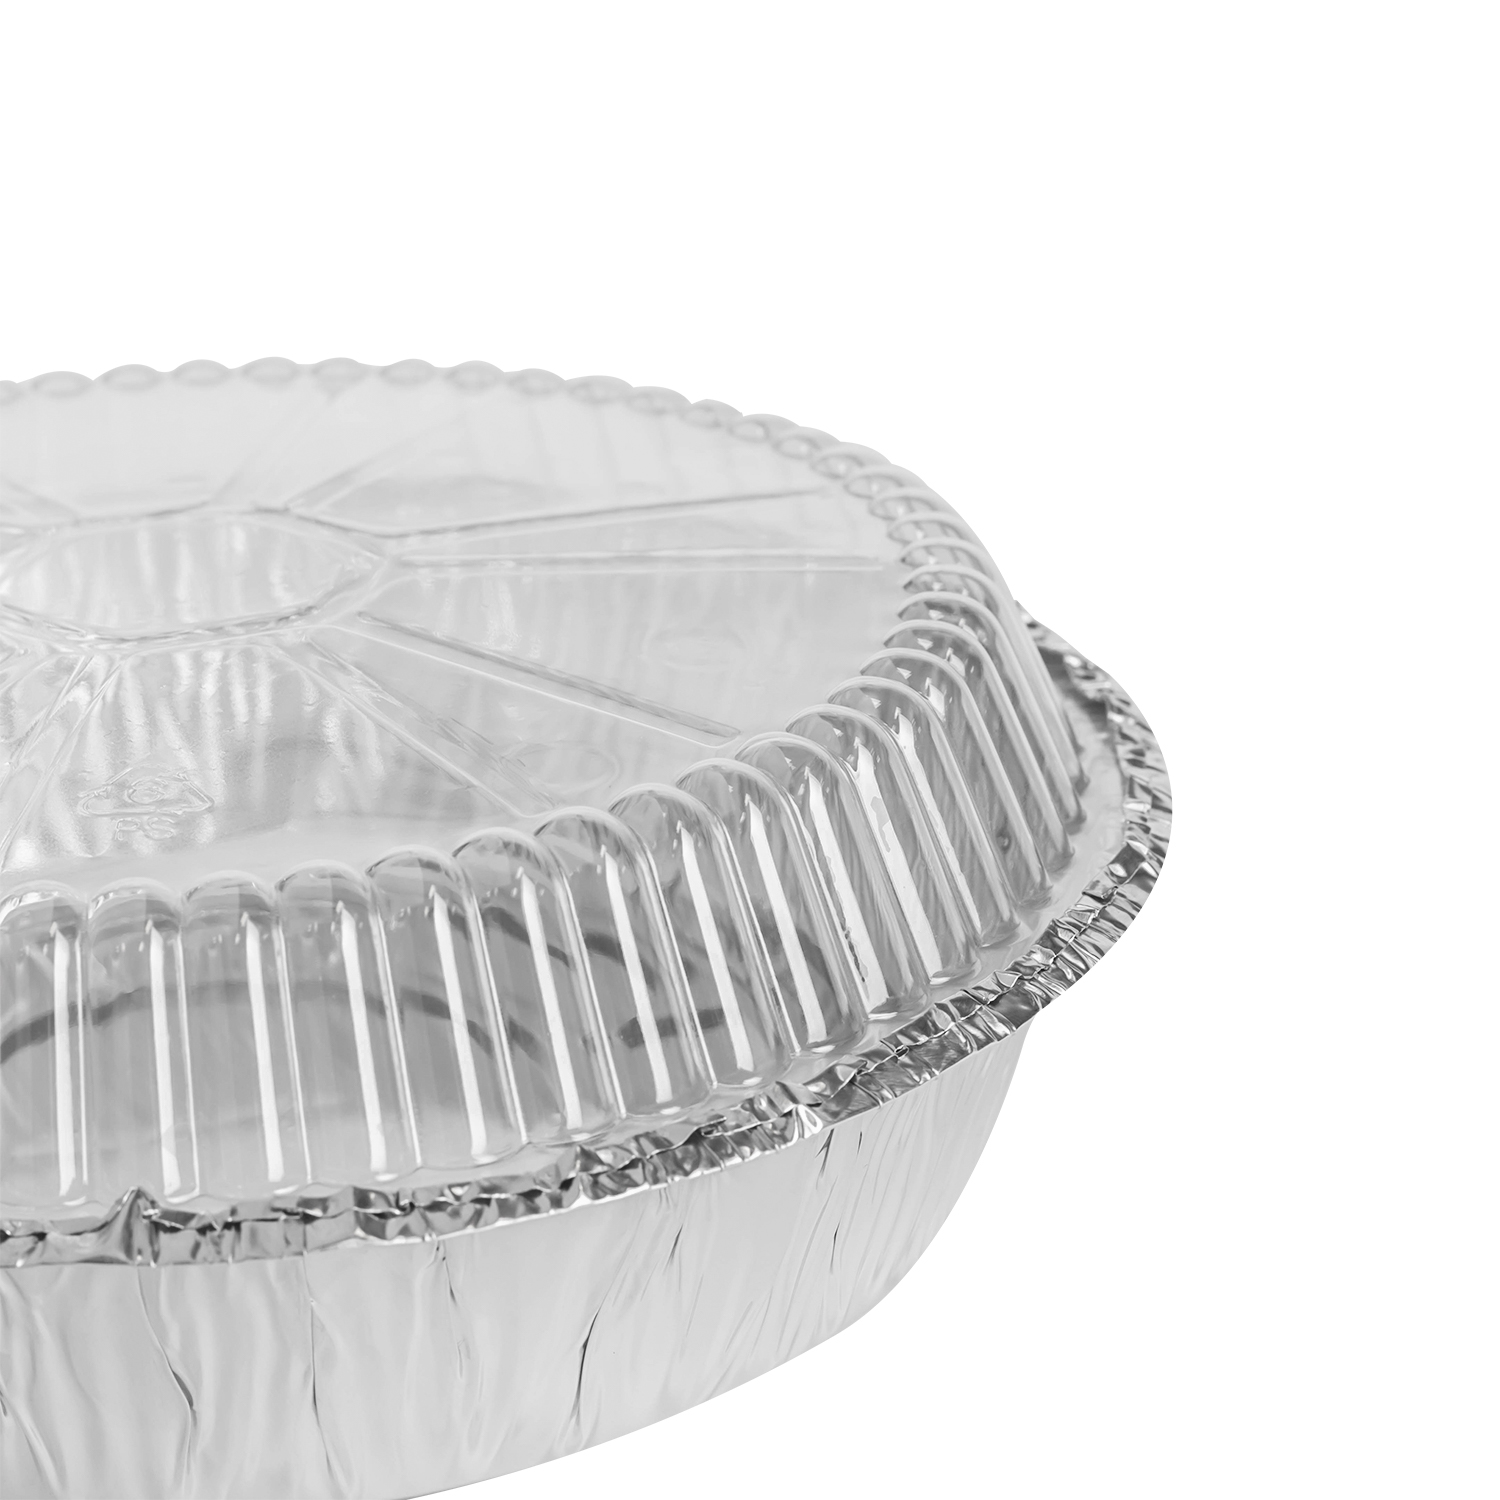 Affordable Aluminium Foil Containers 